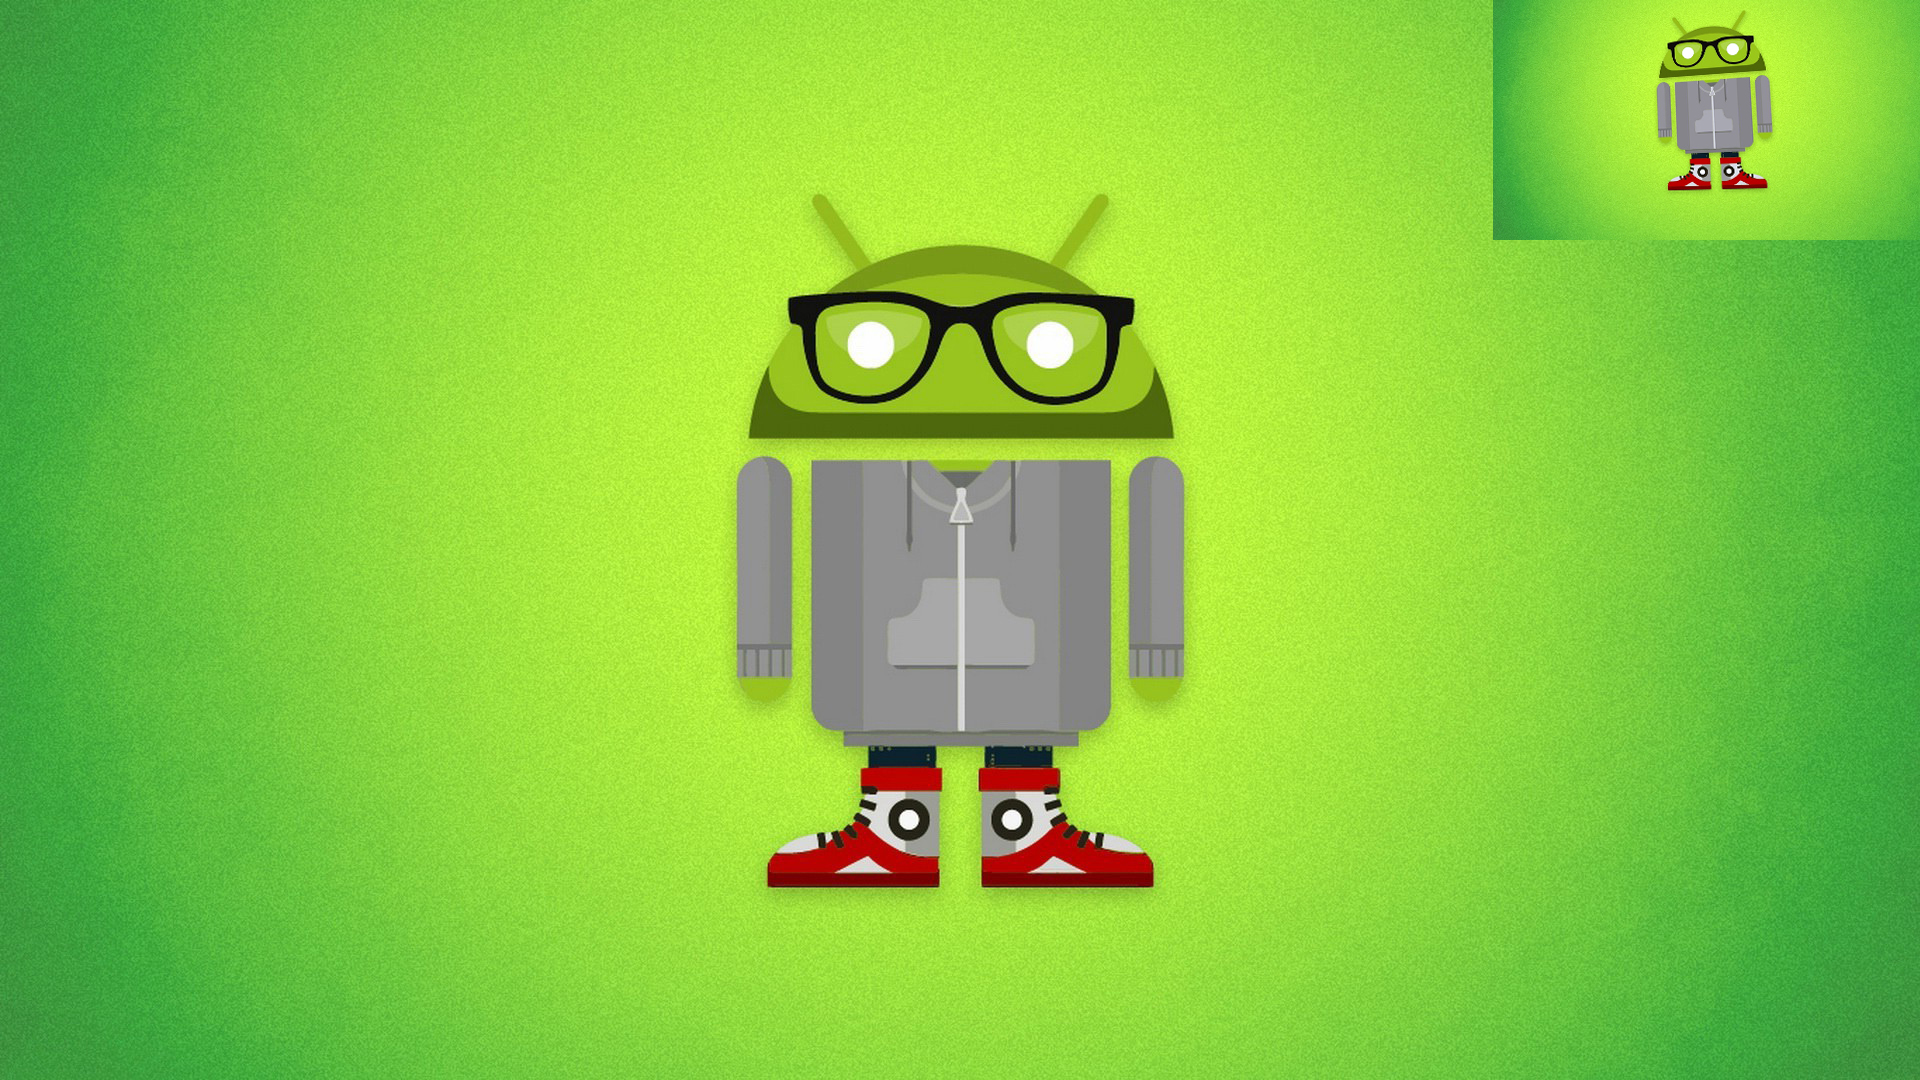 unique wallpapers for android,green,cartoon,animation,illustration,fictional character